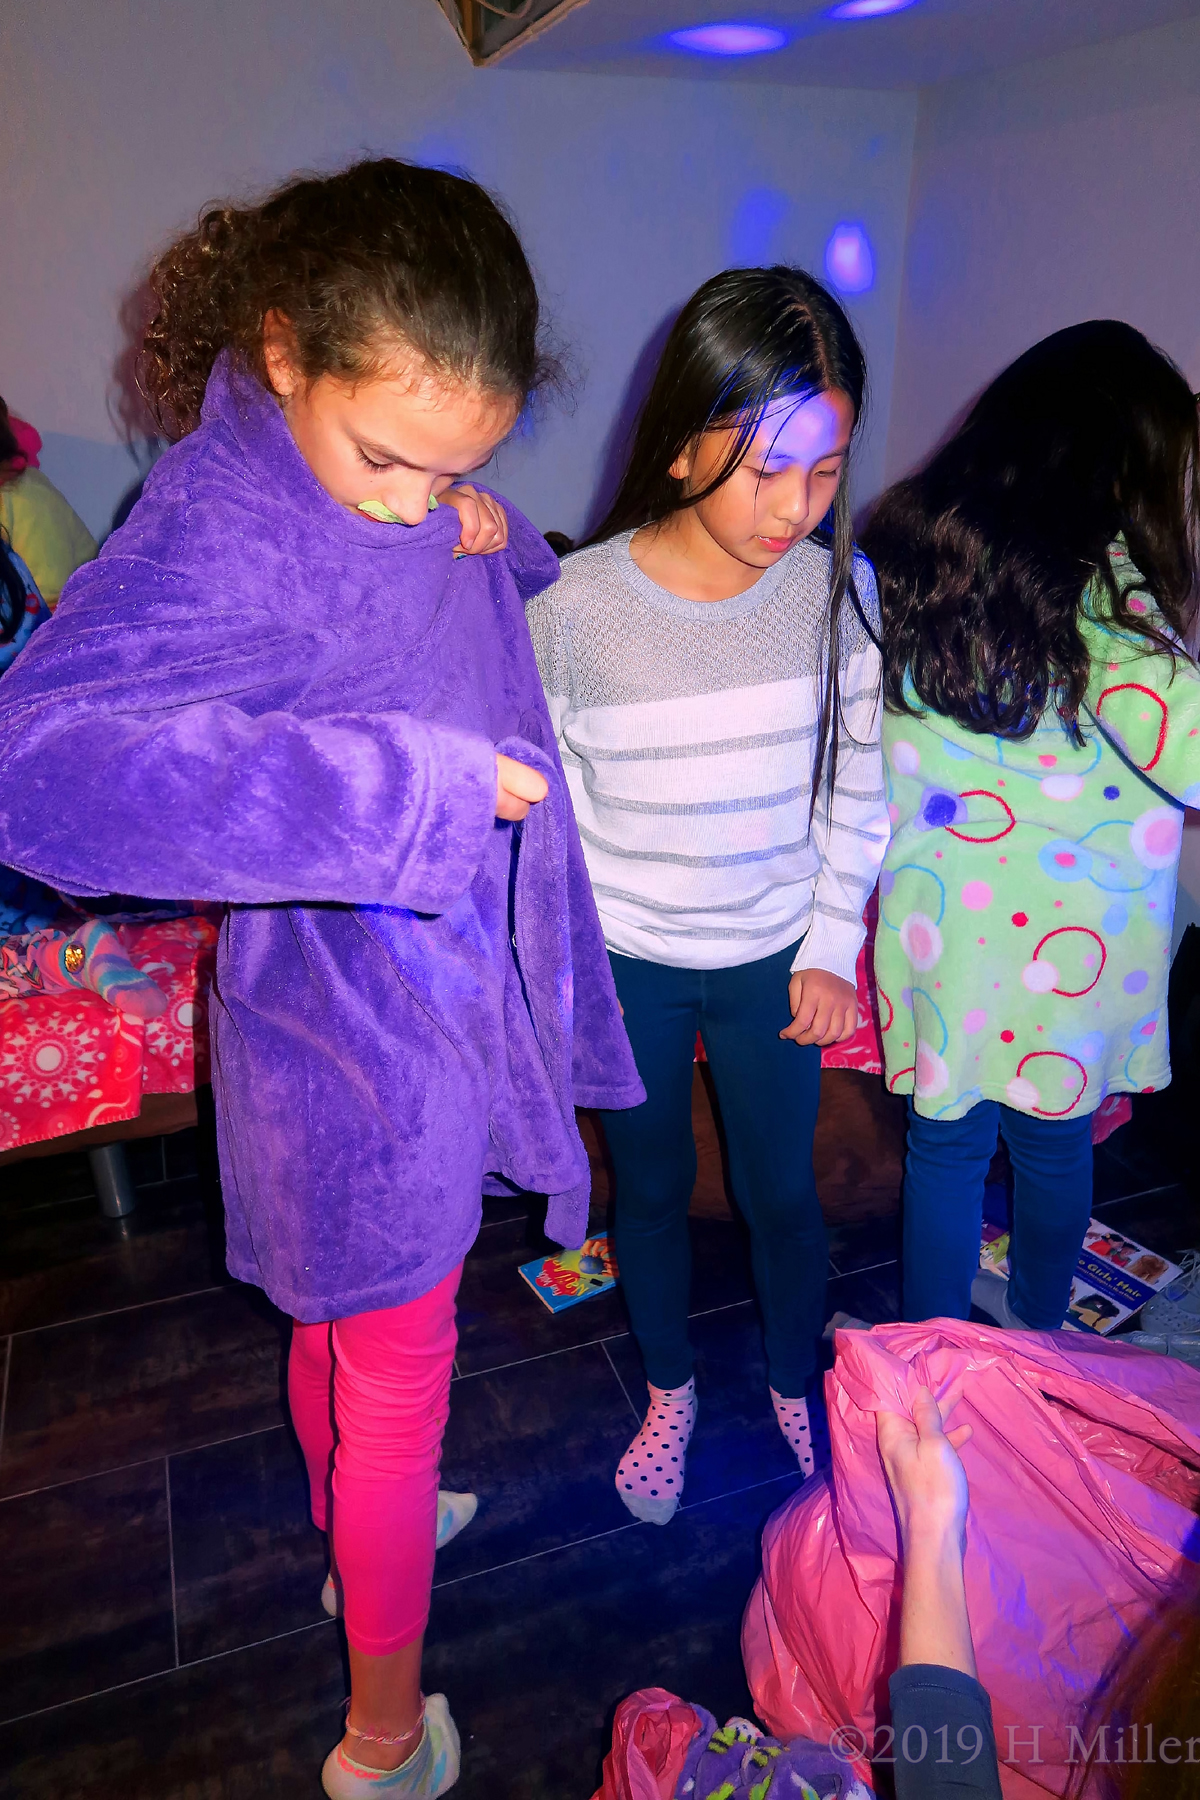 Passion For Party Lights! Spa Kids Get Fitted In Kids Spa Robes! 